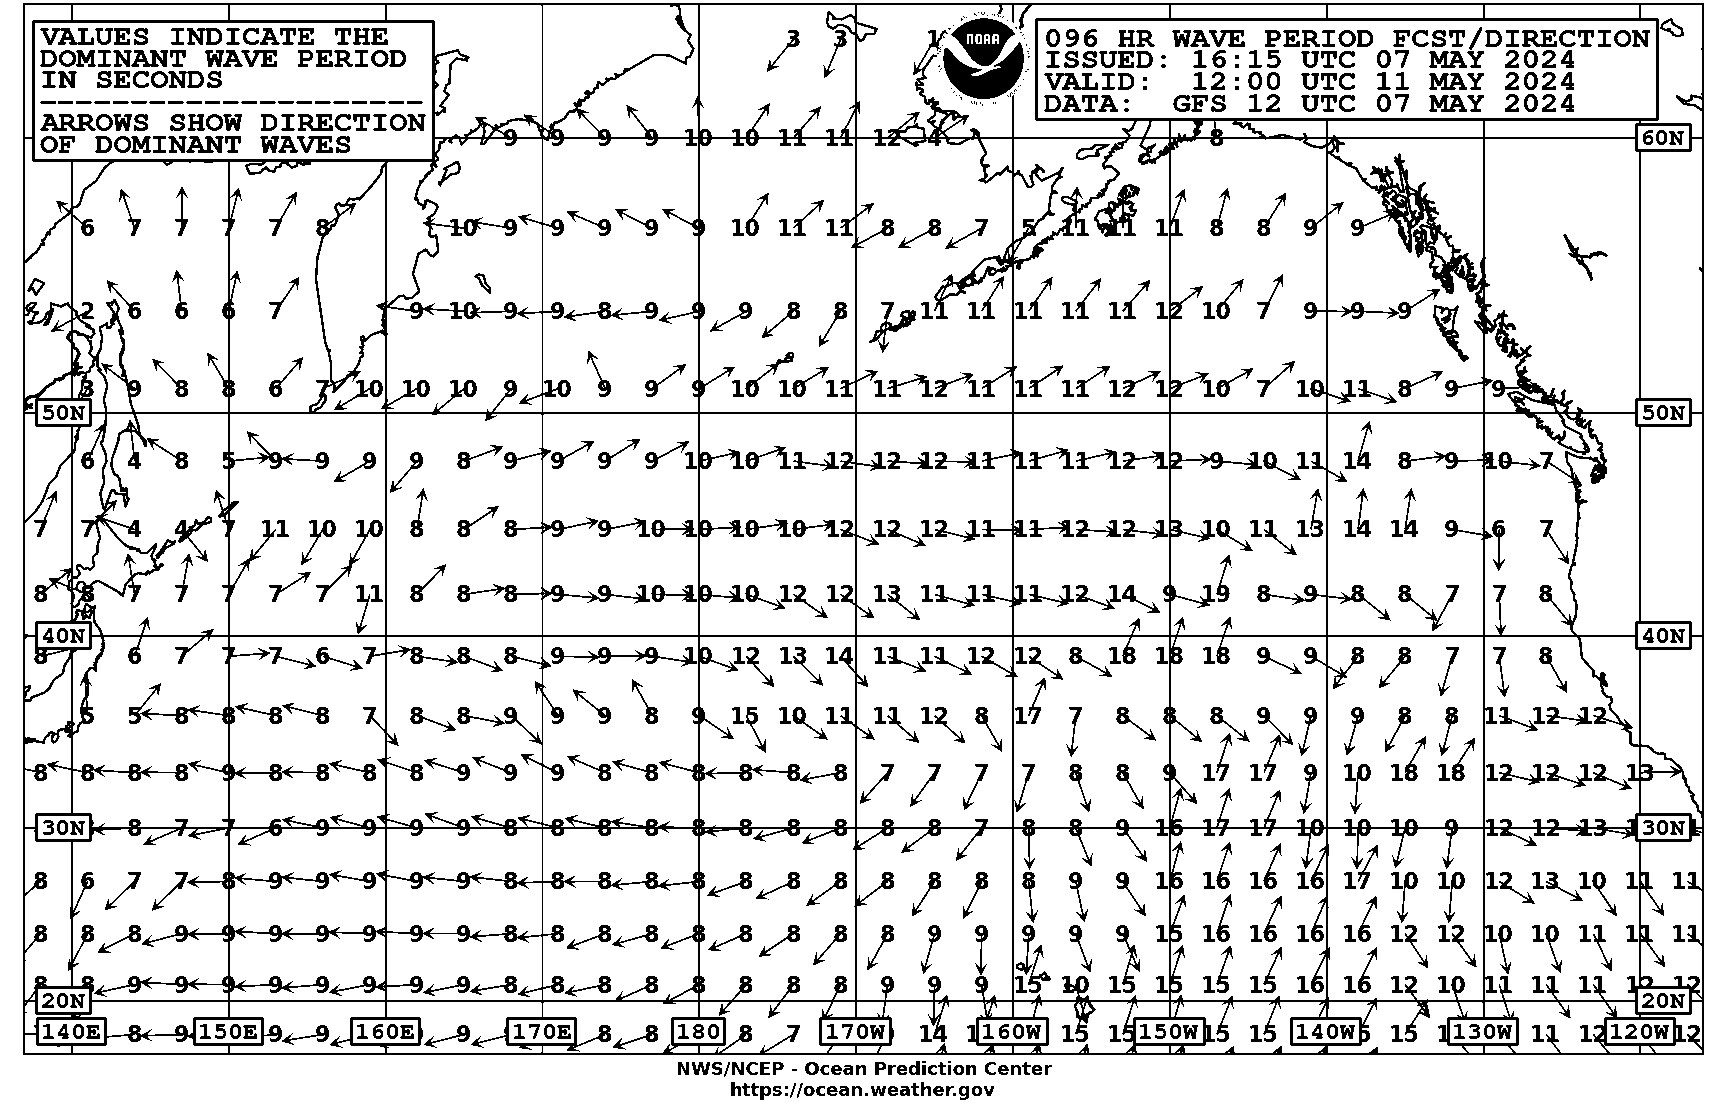 96 hour Pacific wave period